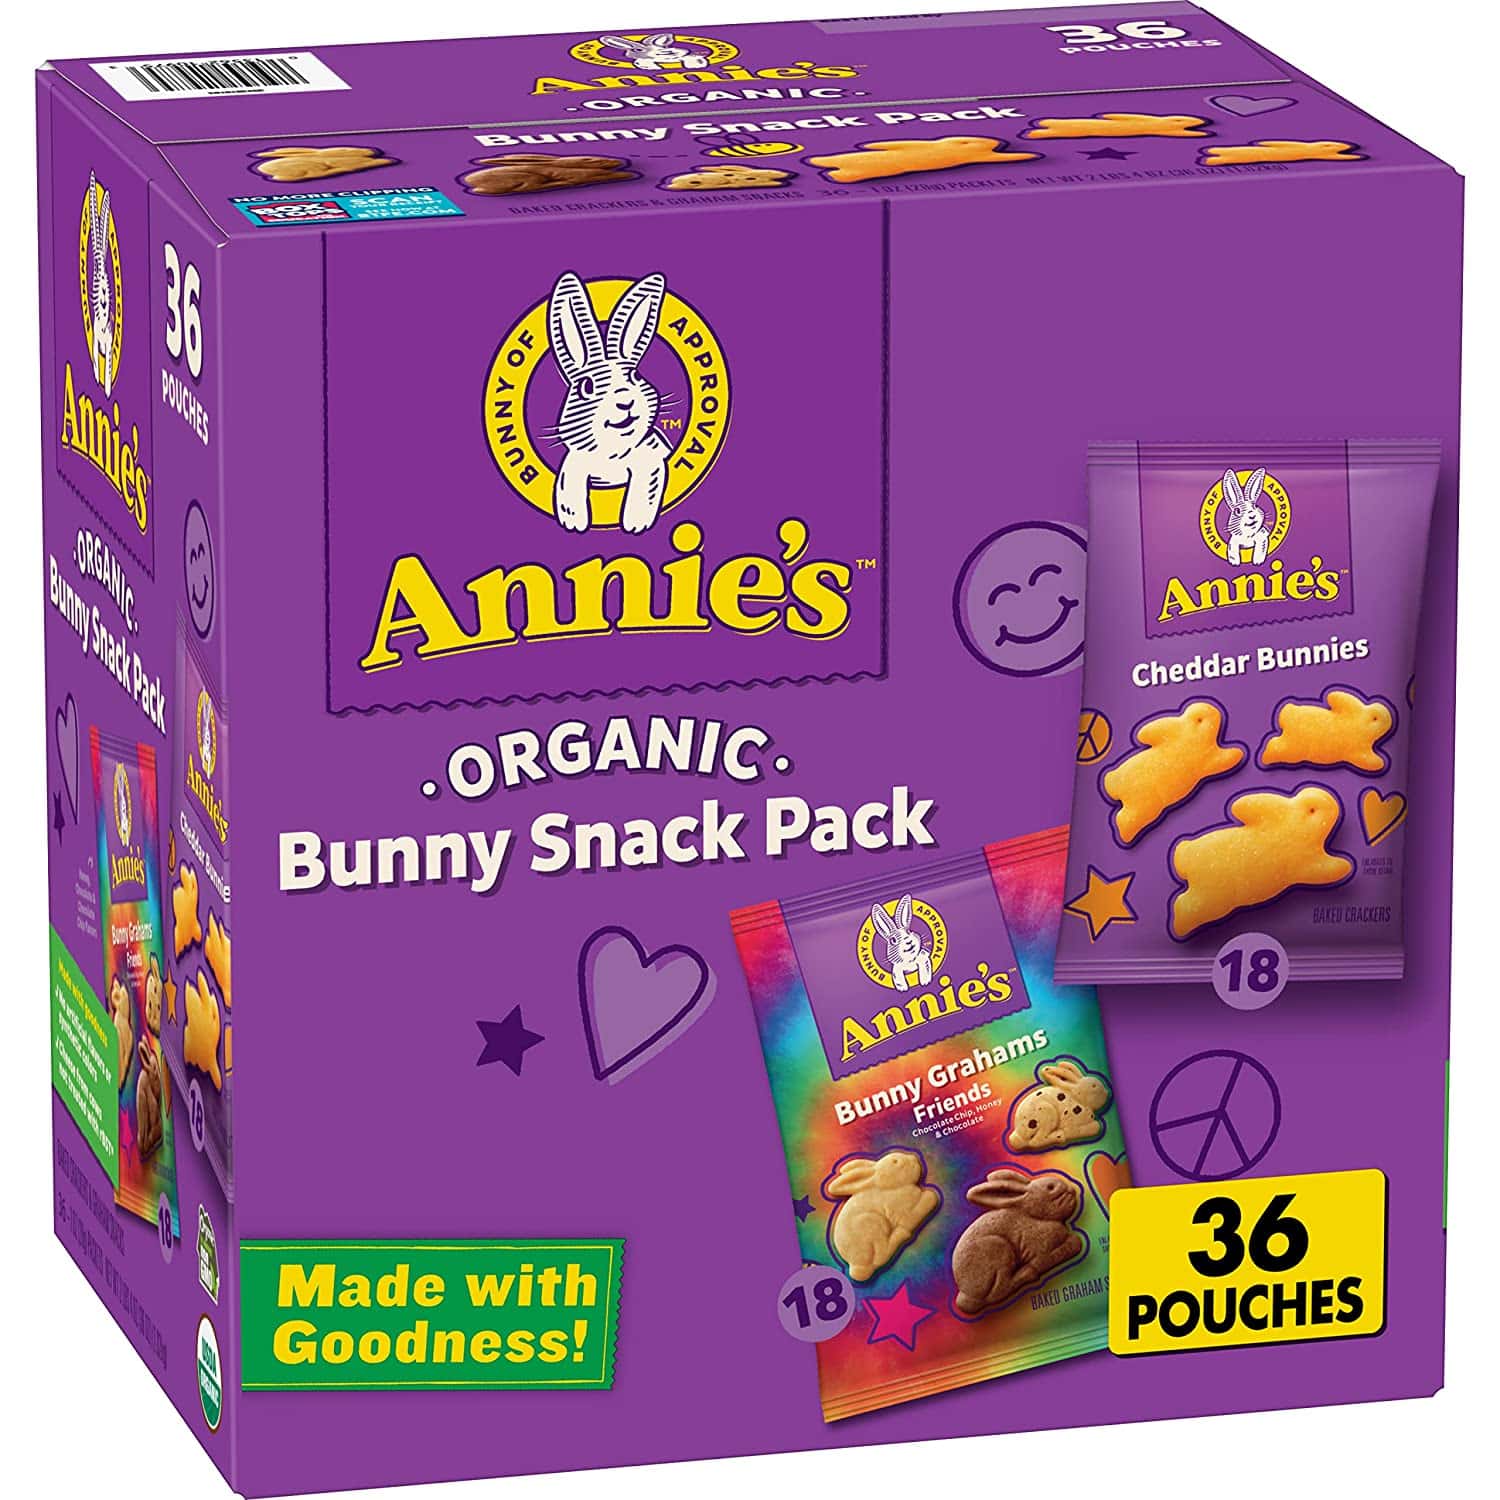 Box of Annie's bunny snack packs 